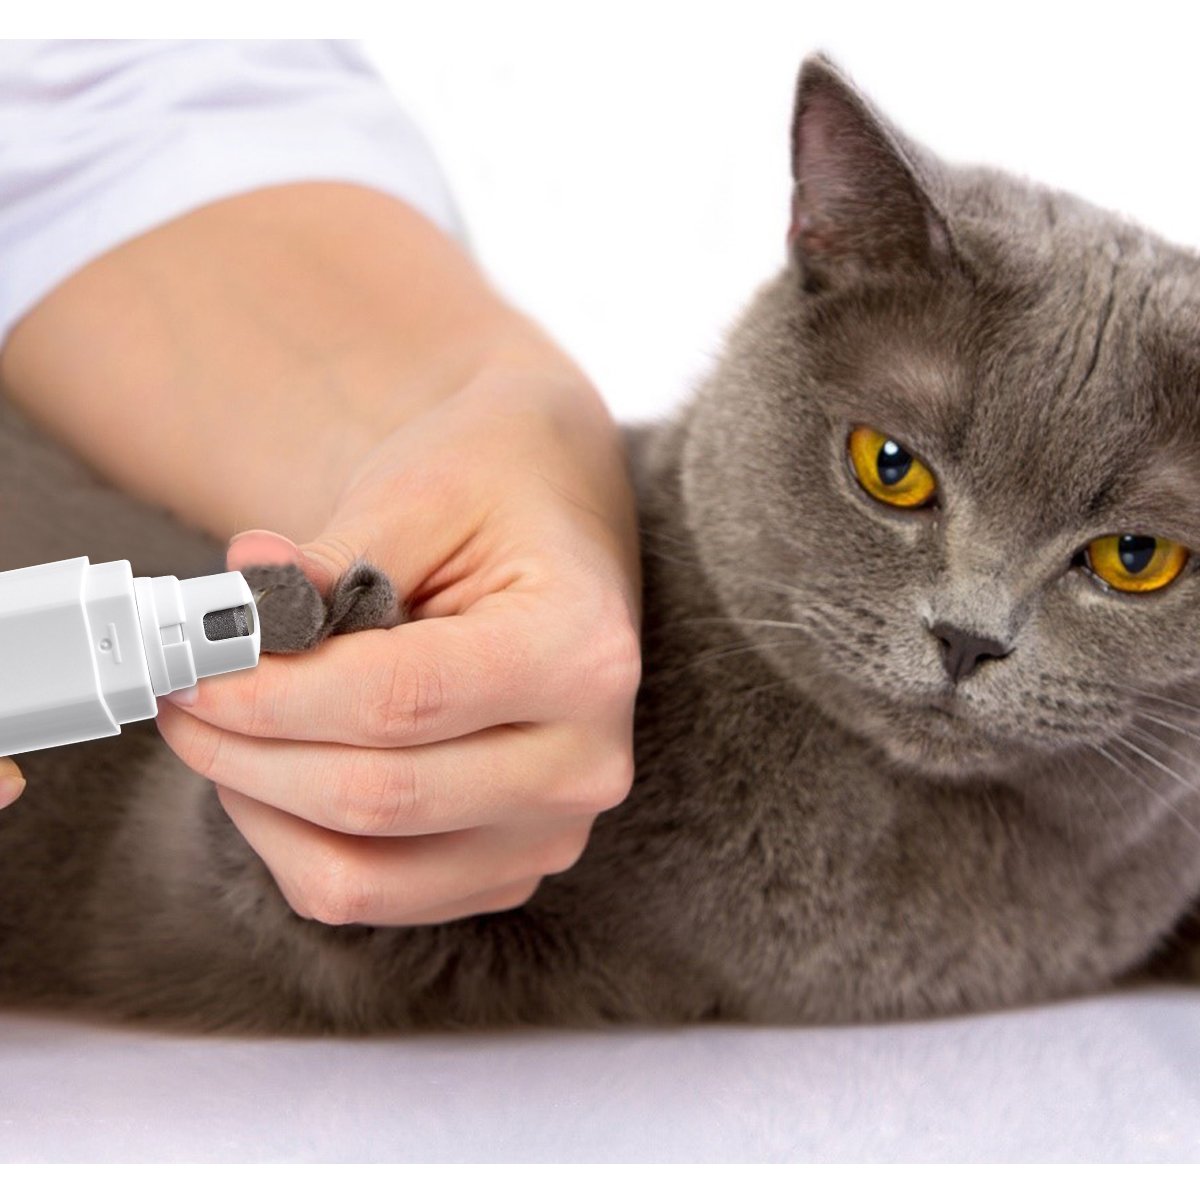 Cat getting their nails filed by a dremel tool